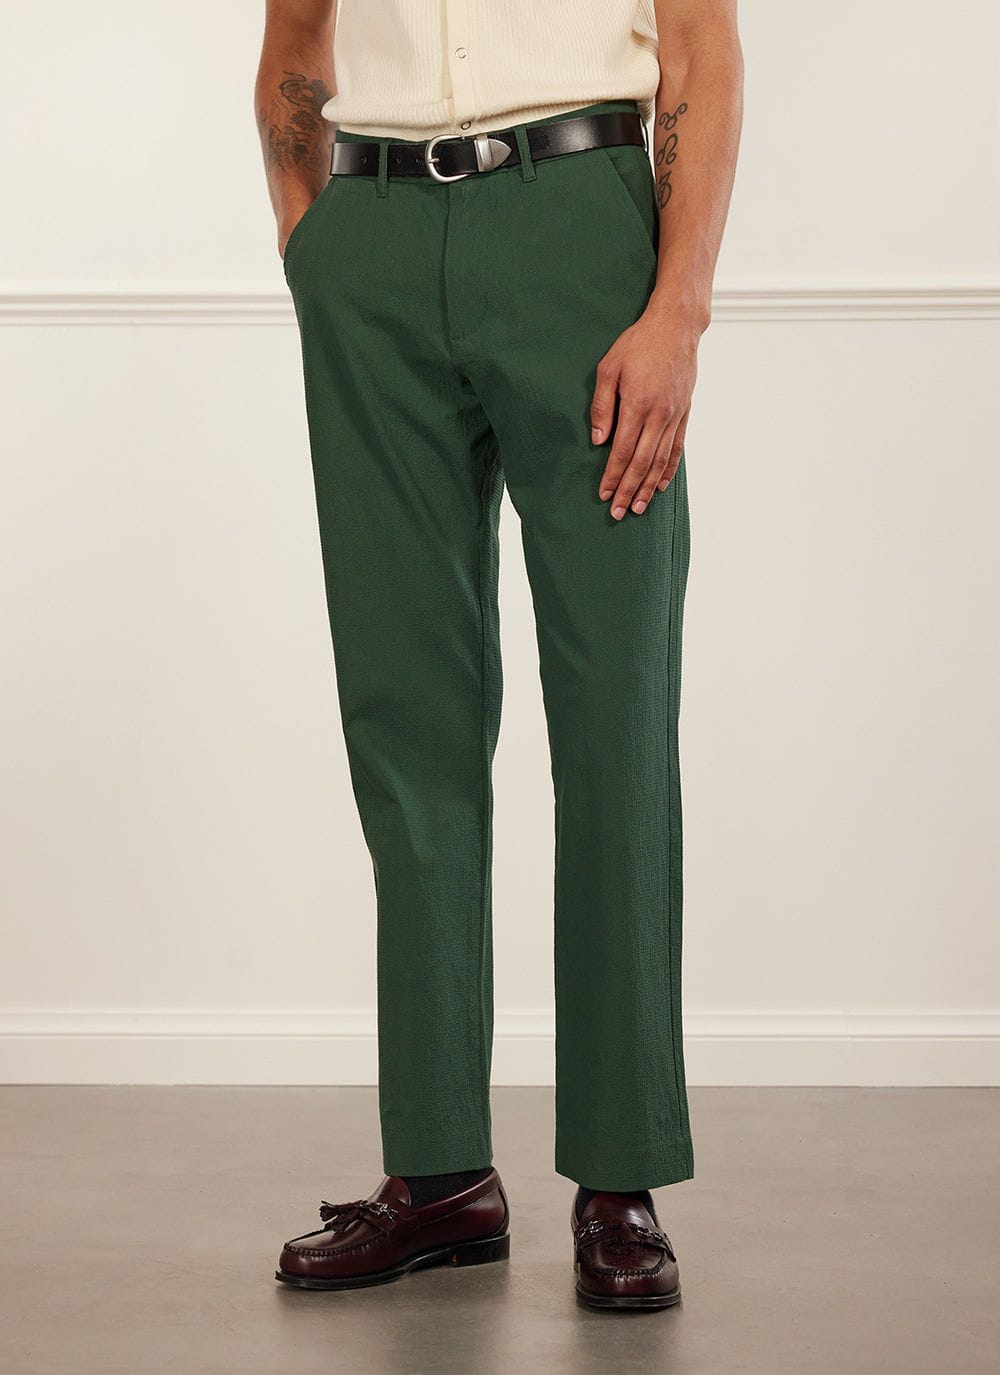 ASOS DESIGN super skinny tuxedo pants in forest green with satin side  stripe - ShopStyle